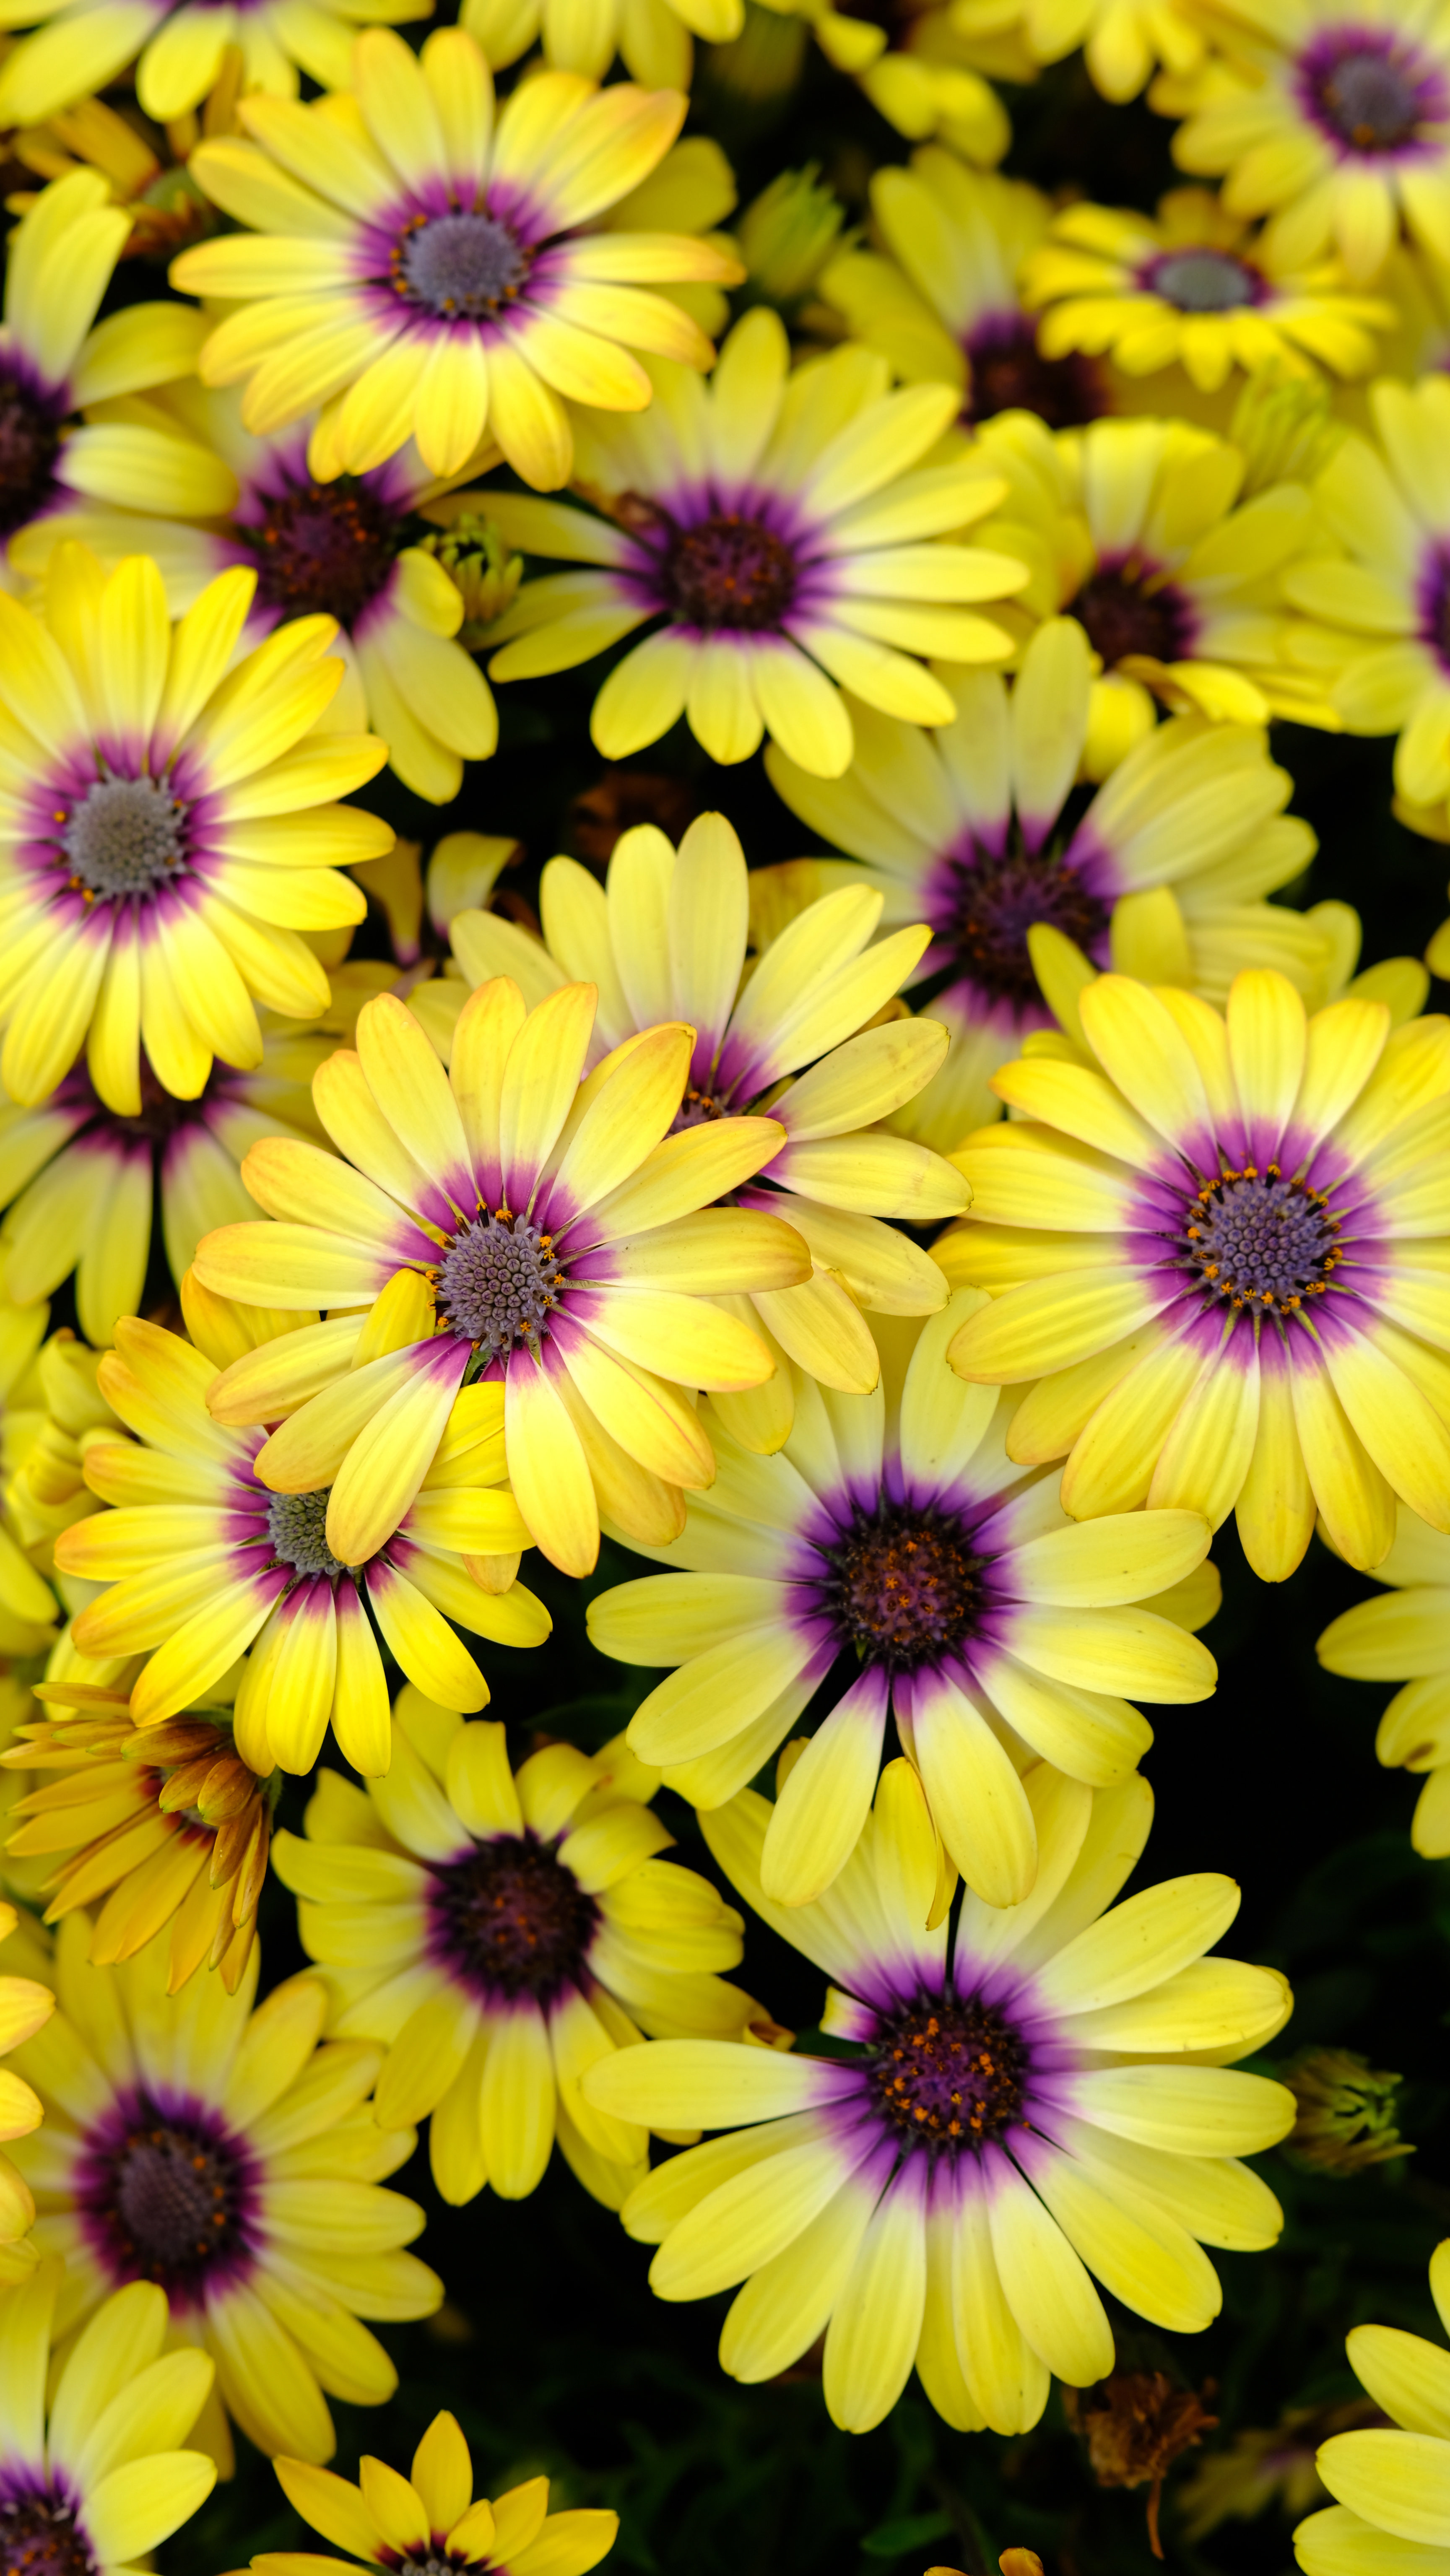 camomile, chamomile, flowers, petals wallpapers for tablet